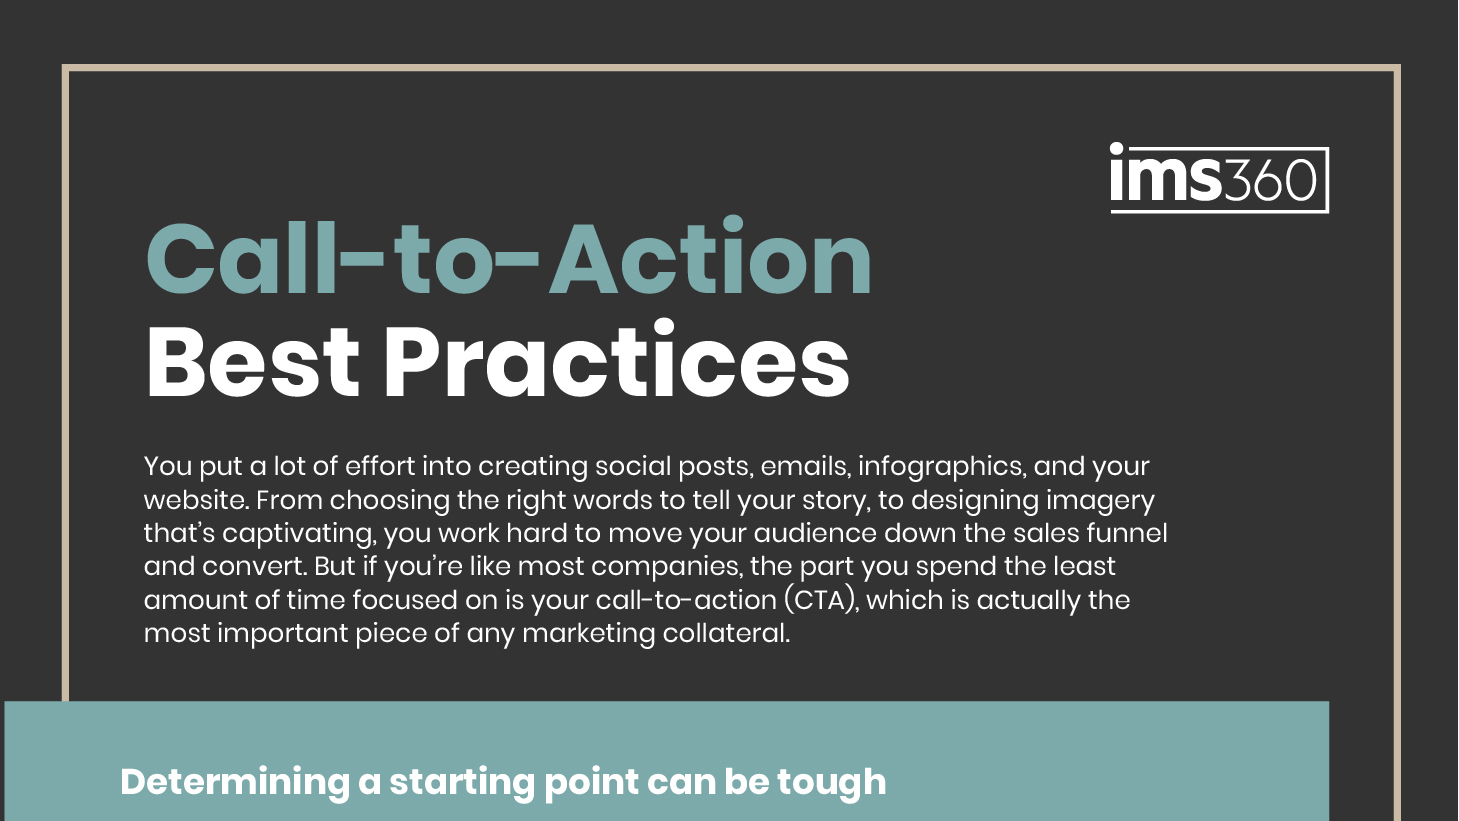 Call-to-Action Best Practices Guide